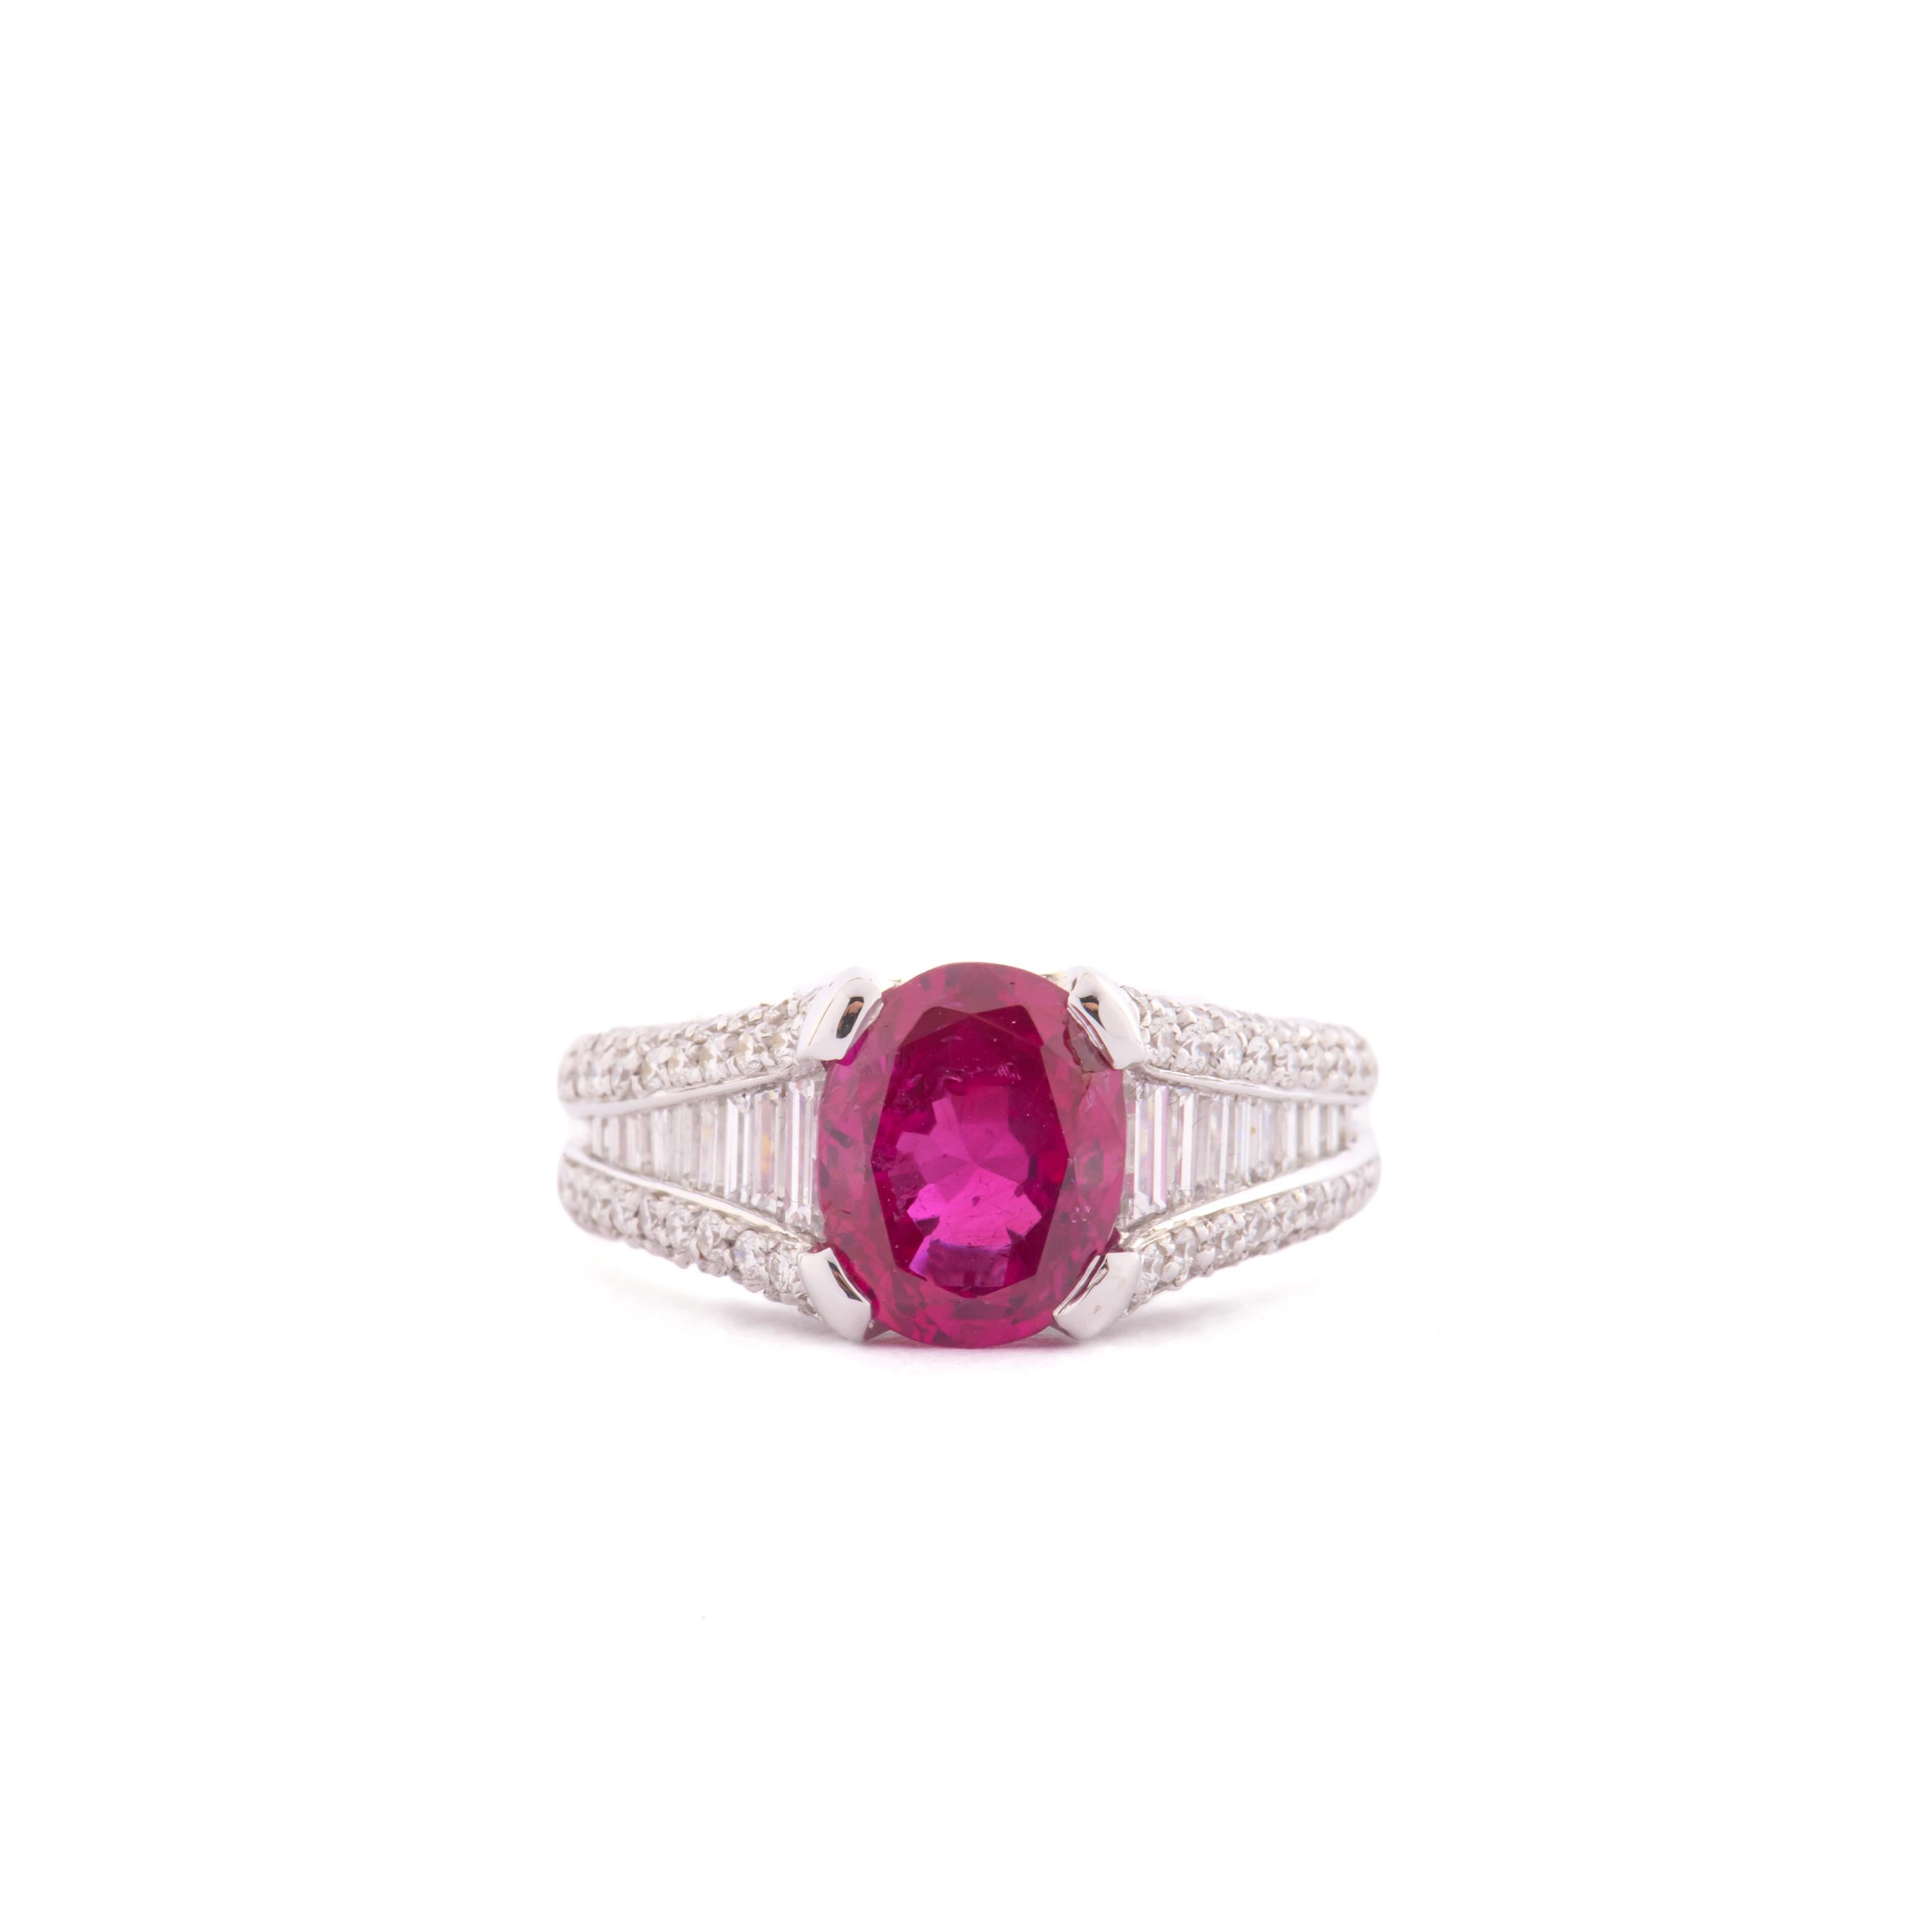 Amazing 18 KT Ruby And Diamonds Ring

Oval ruby 3,15ct
Round Diamonds 0,68ct
Baguettes Diamonds 0,90ct.